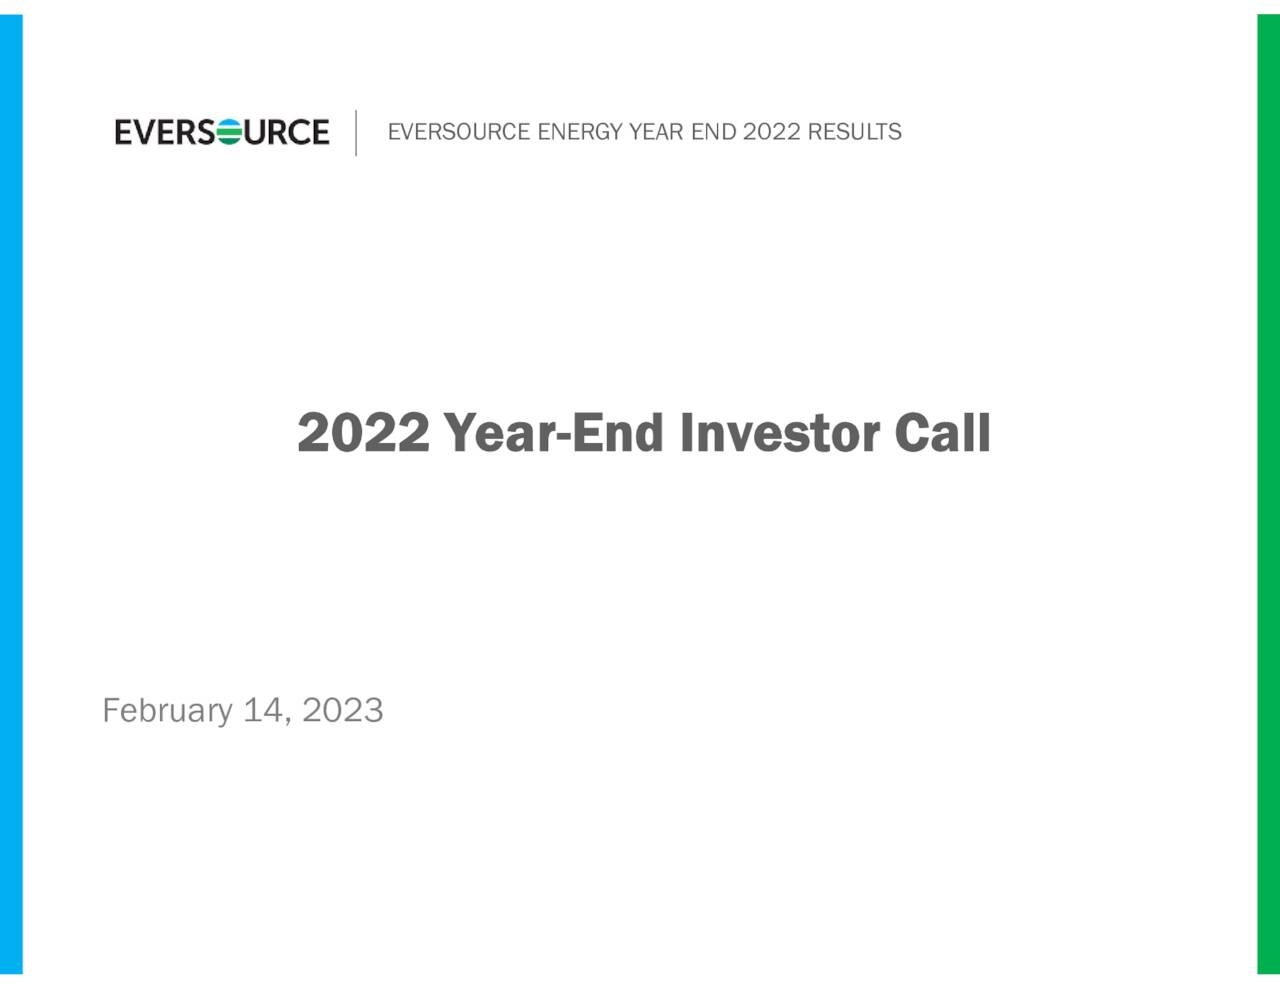 EVERSOURCE ENERGY YEAR END 2022 RESULTS